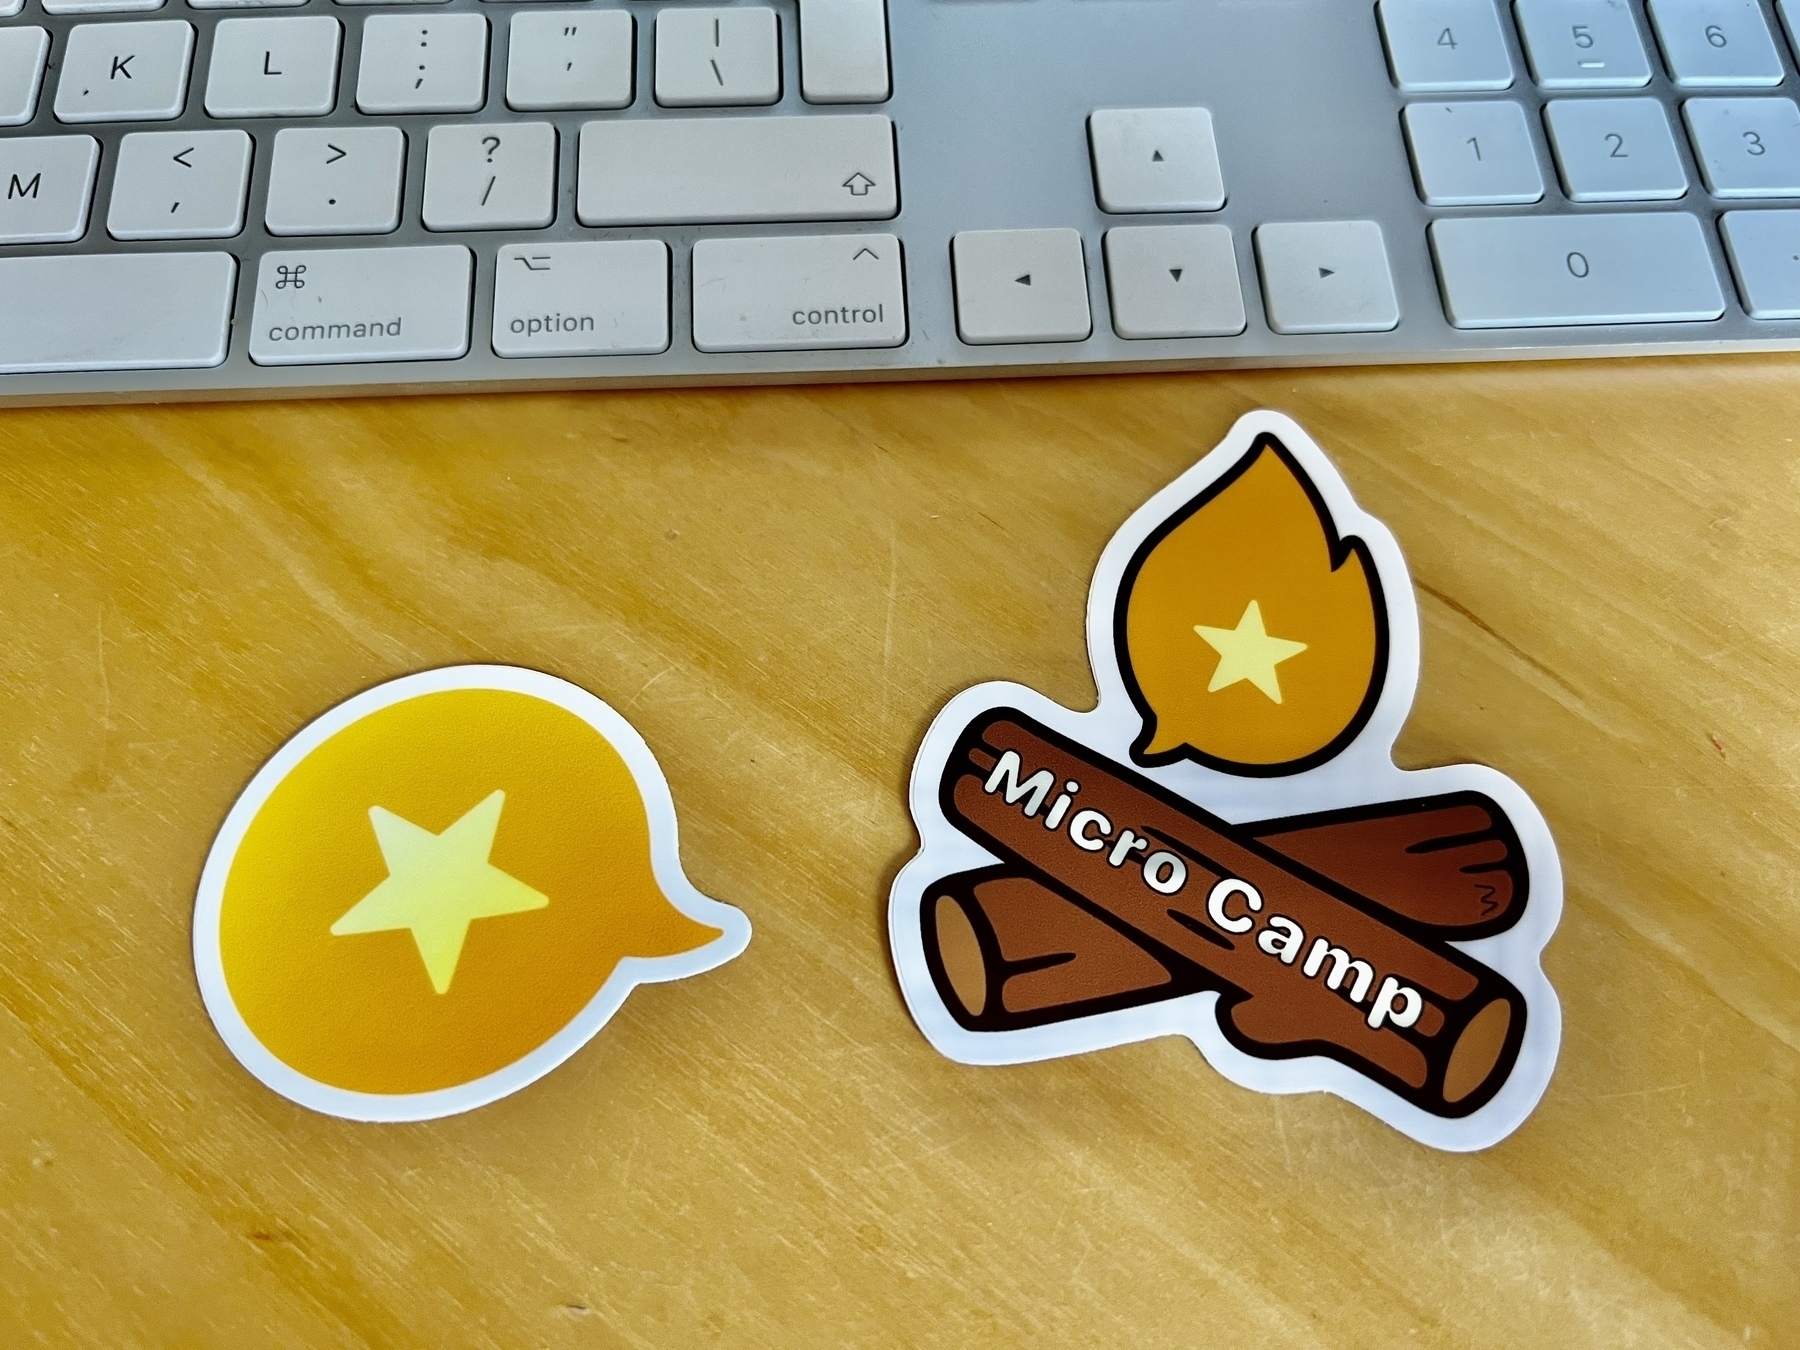 Micro.blog and micro camp stickers